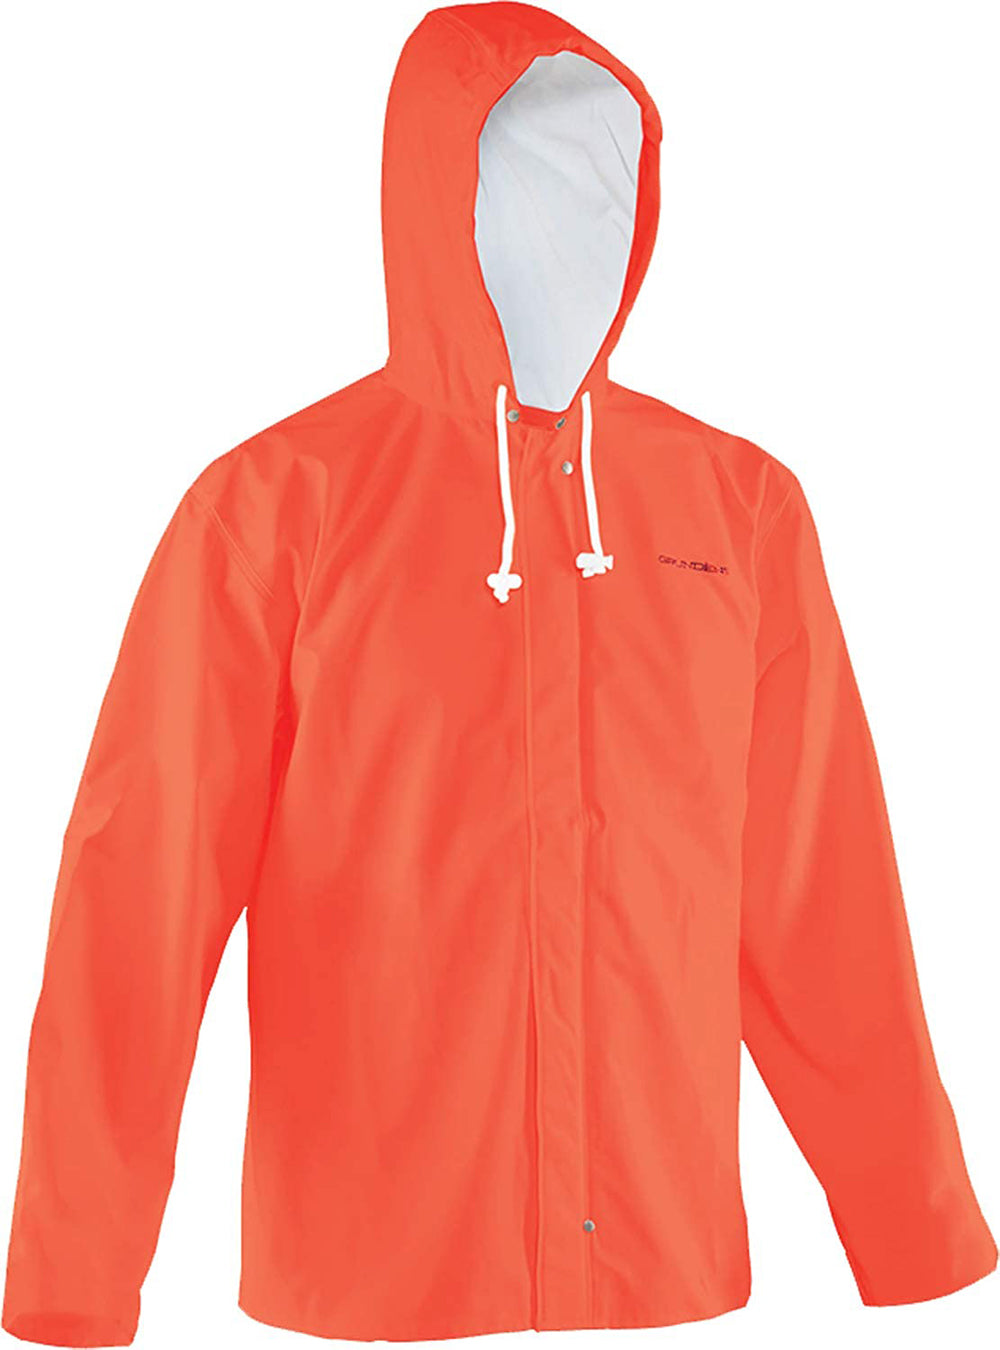 Petrus 82 Jacket in Orange color from the front view